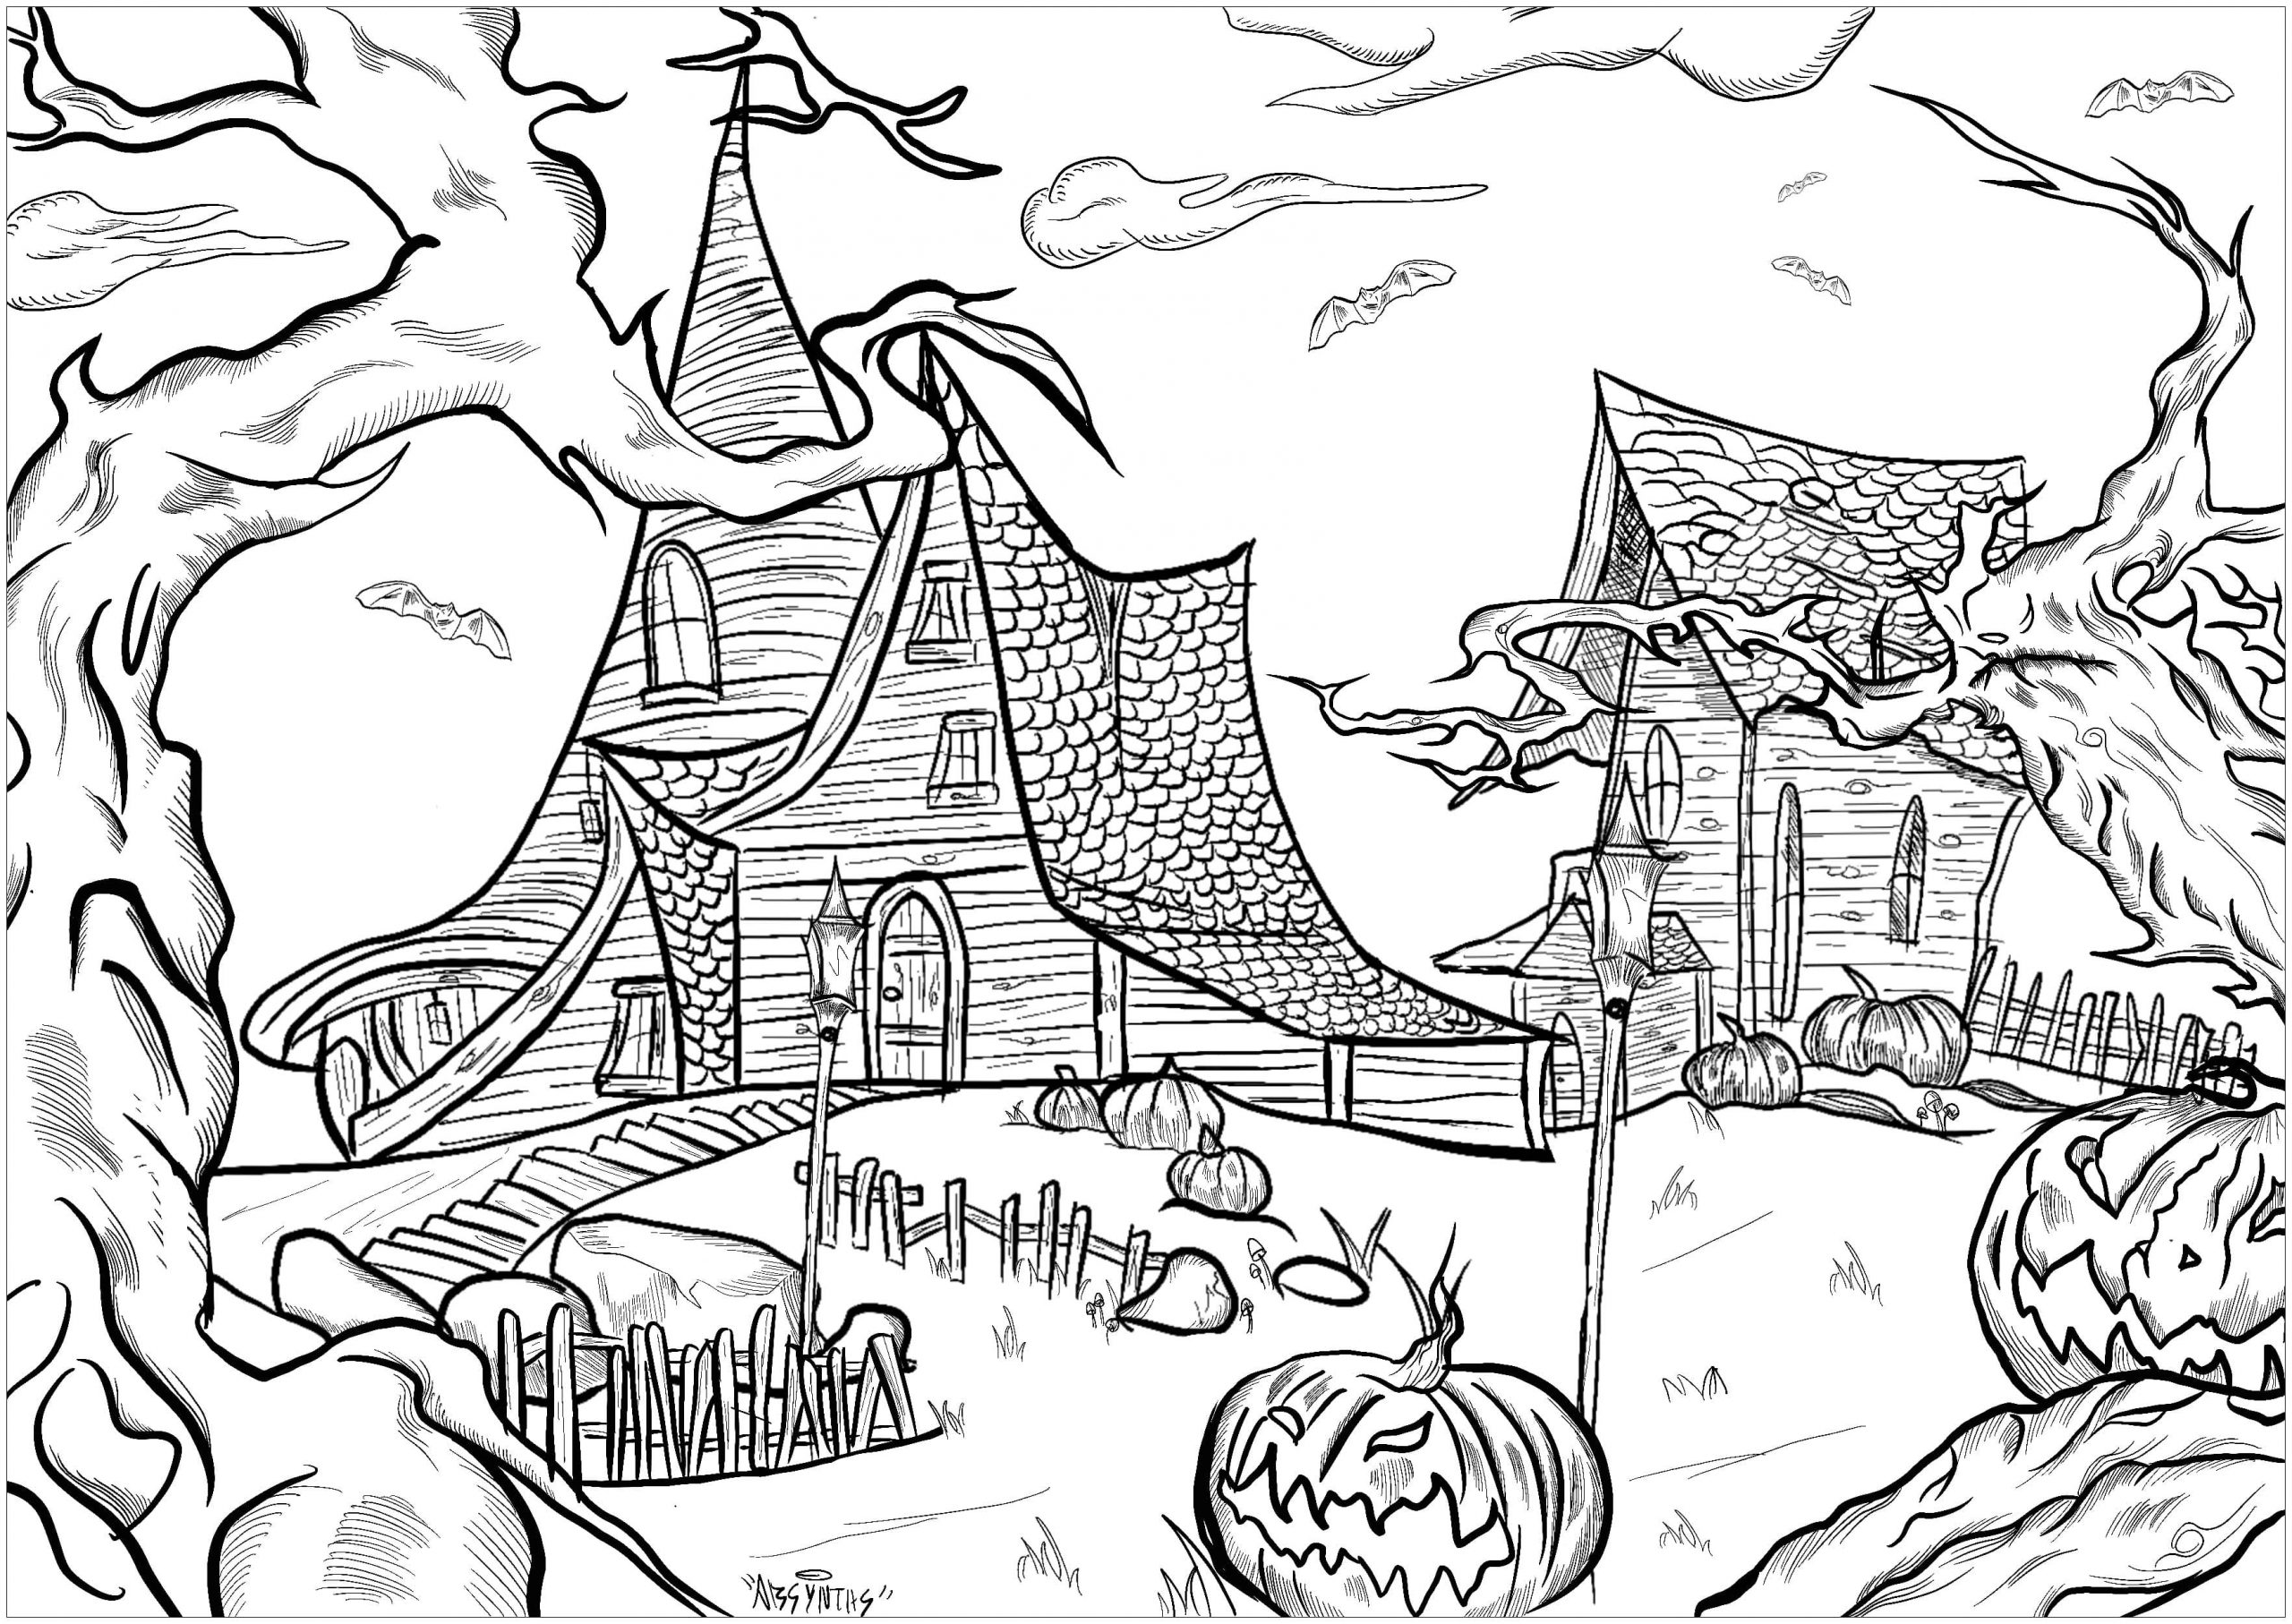 Two Haunted Houses Image For Children